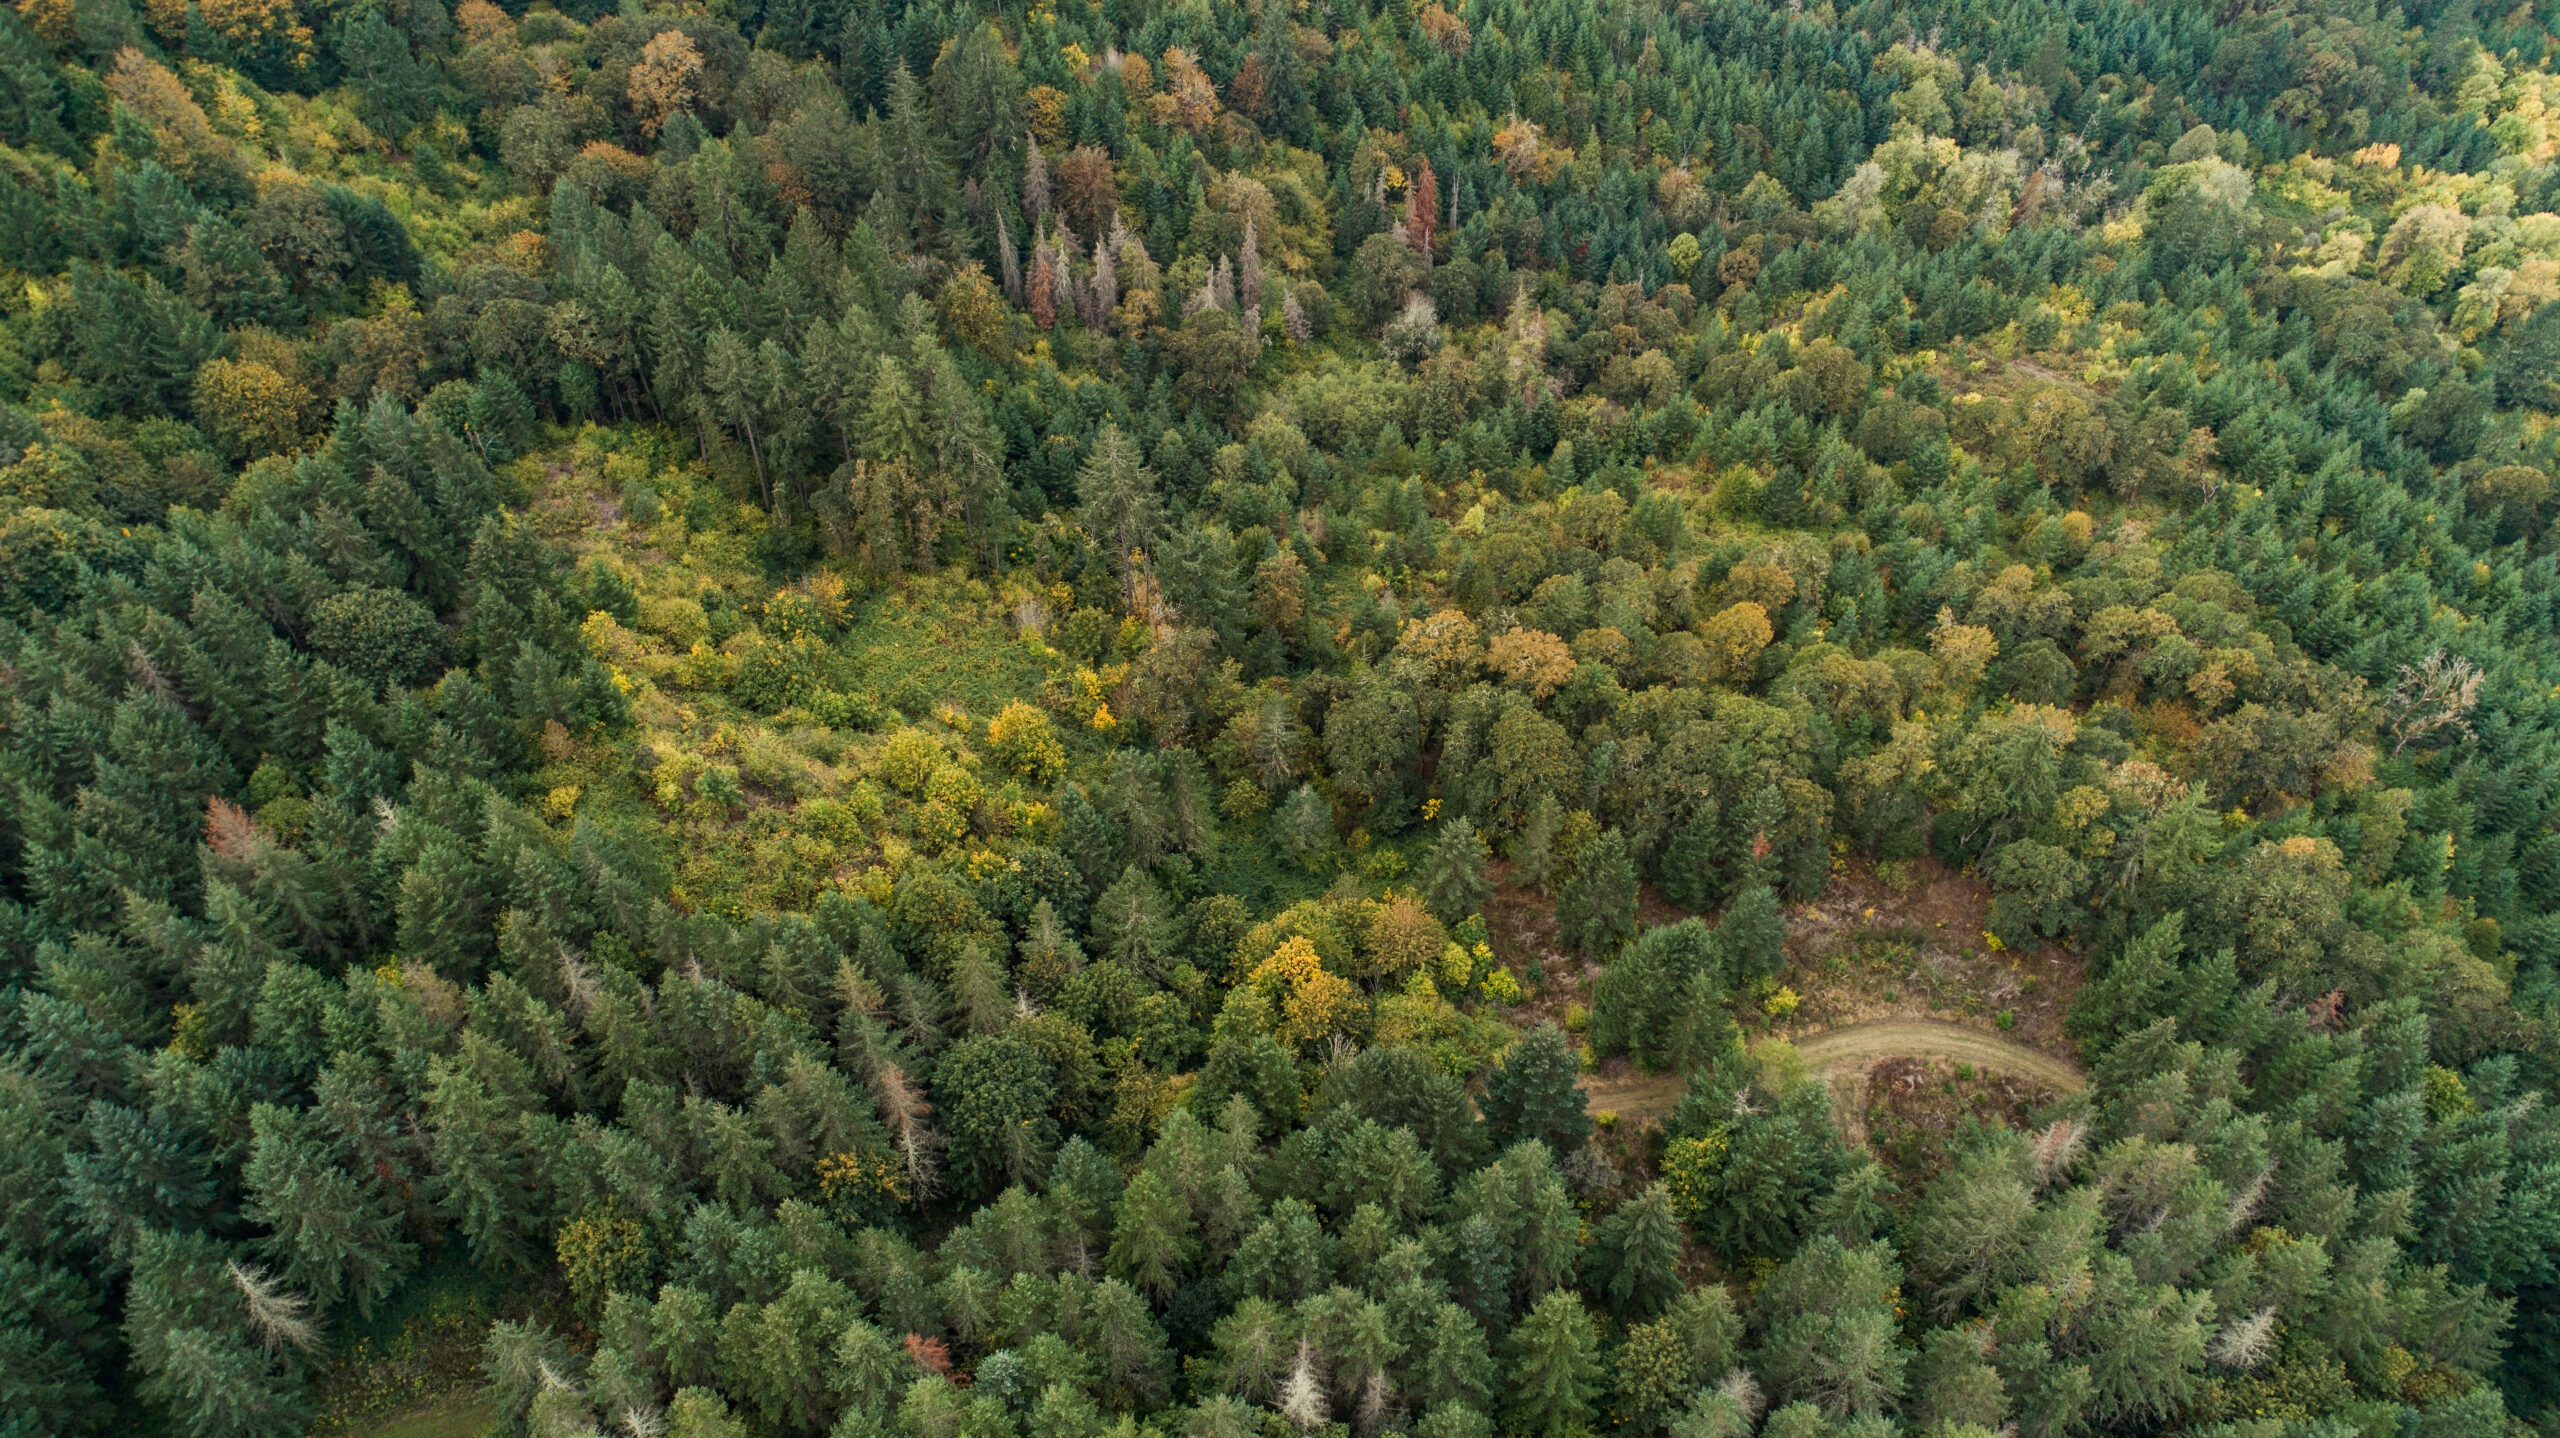 An aerial view of tree tops among the mature forest at Fairsing Vineyard in Oregon's Willamette Valley